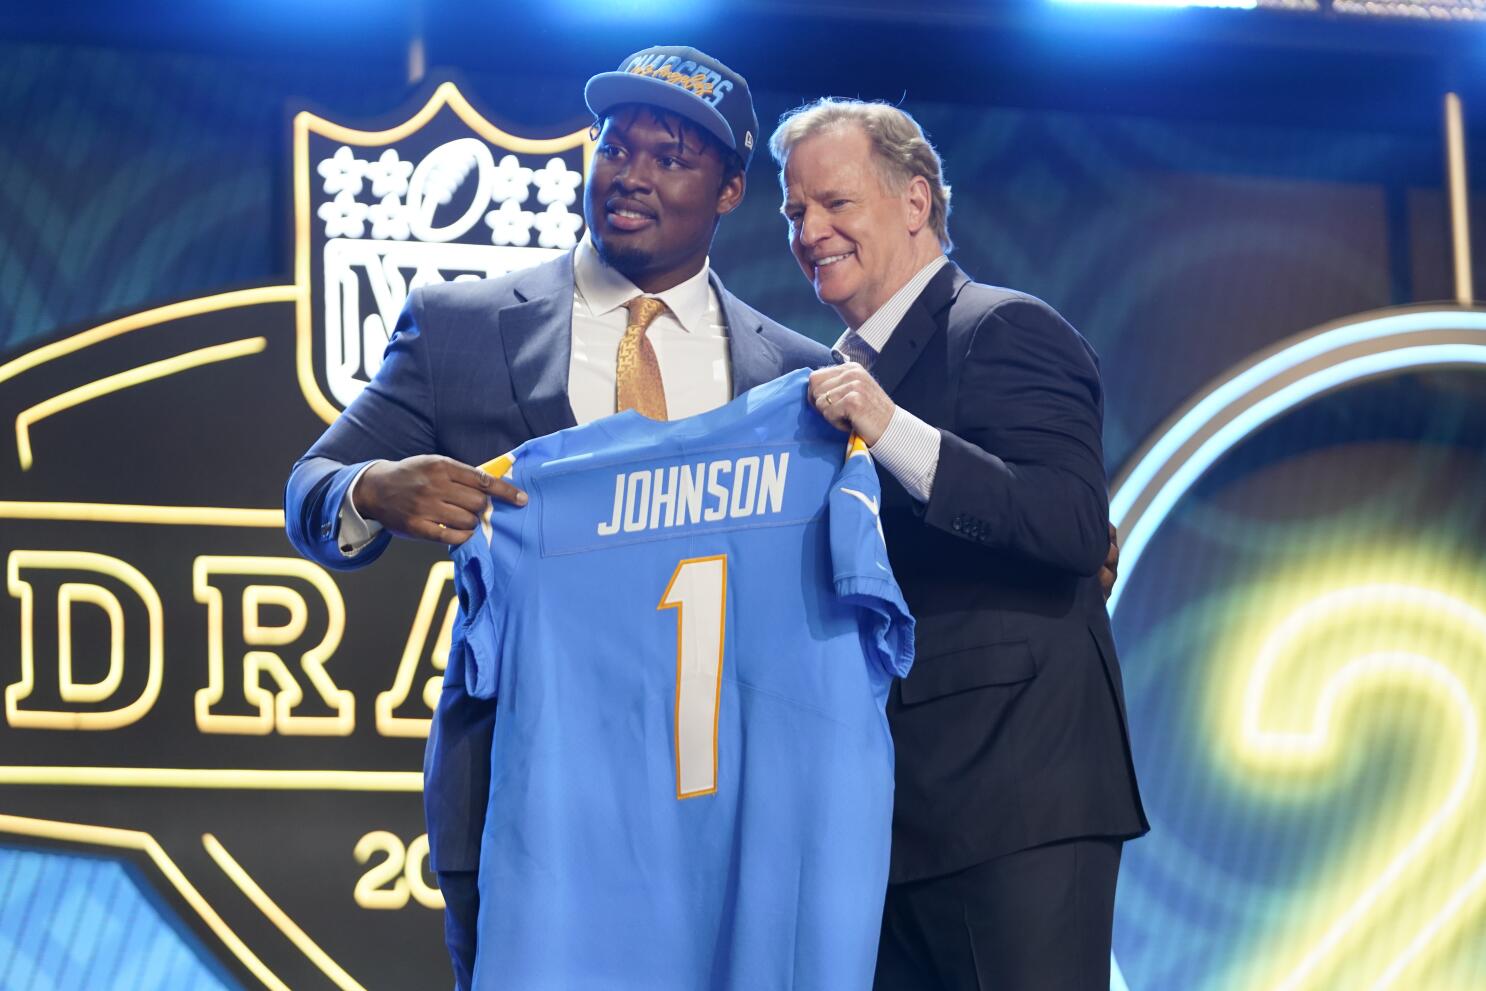 NFL draft: Whom might the Chargers select in the first round